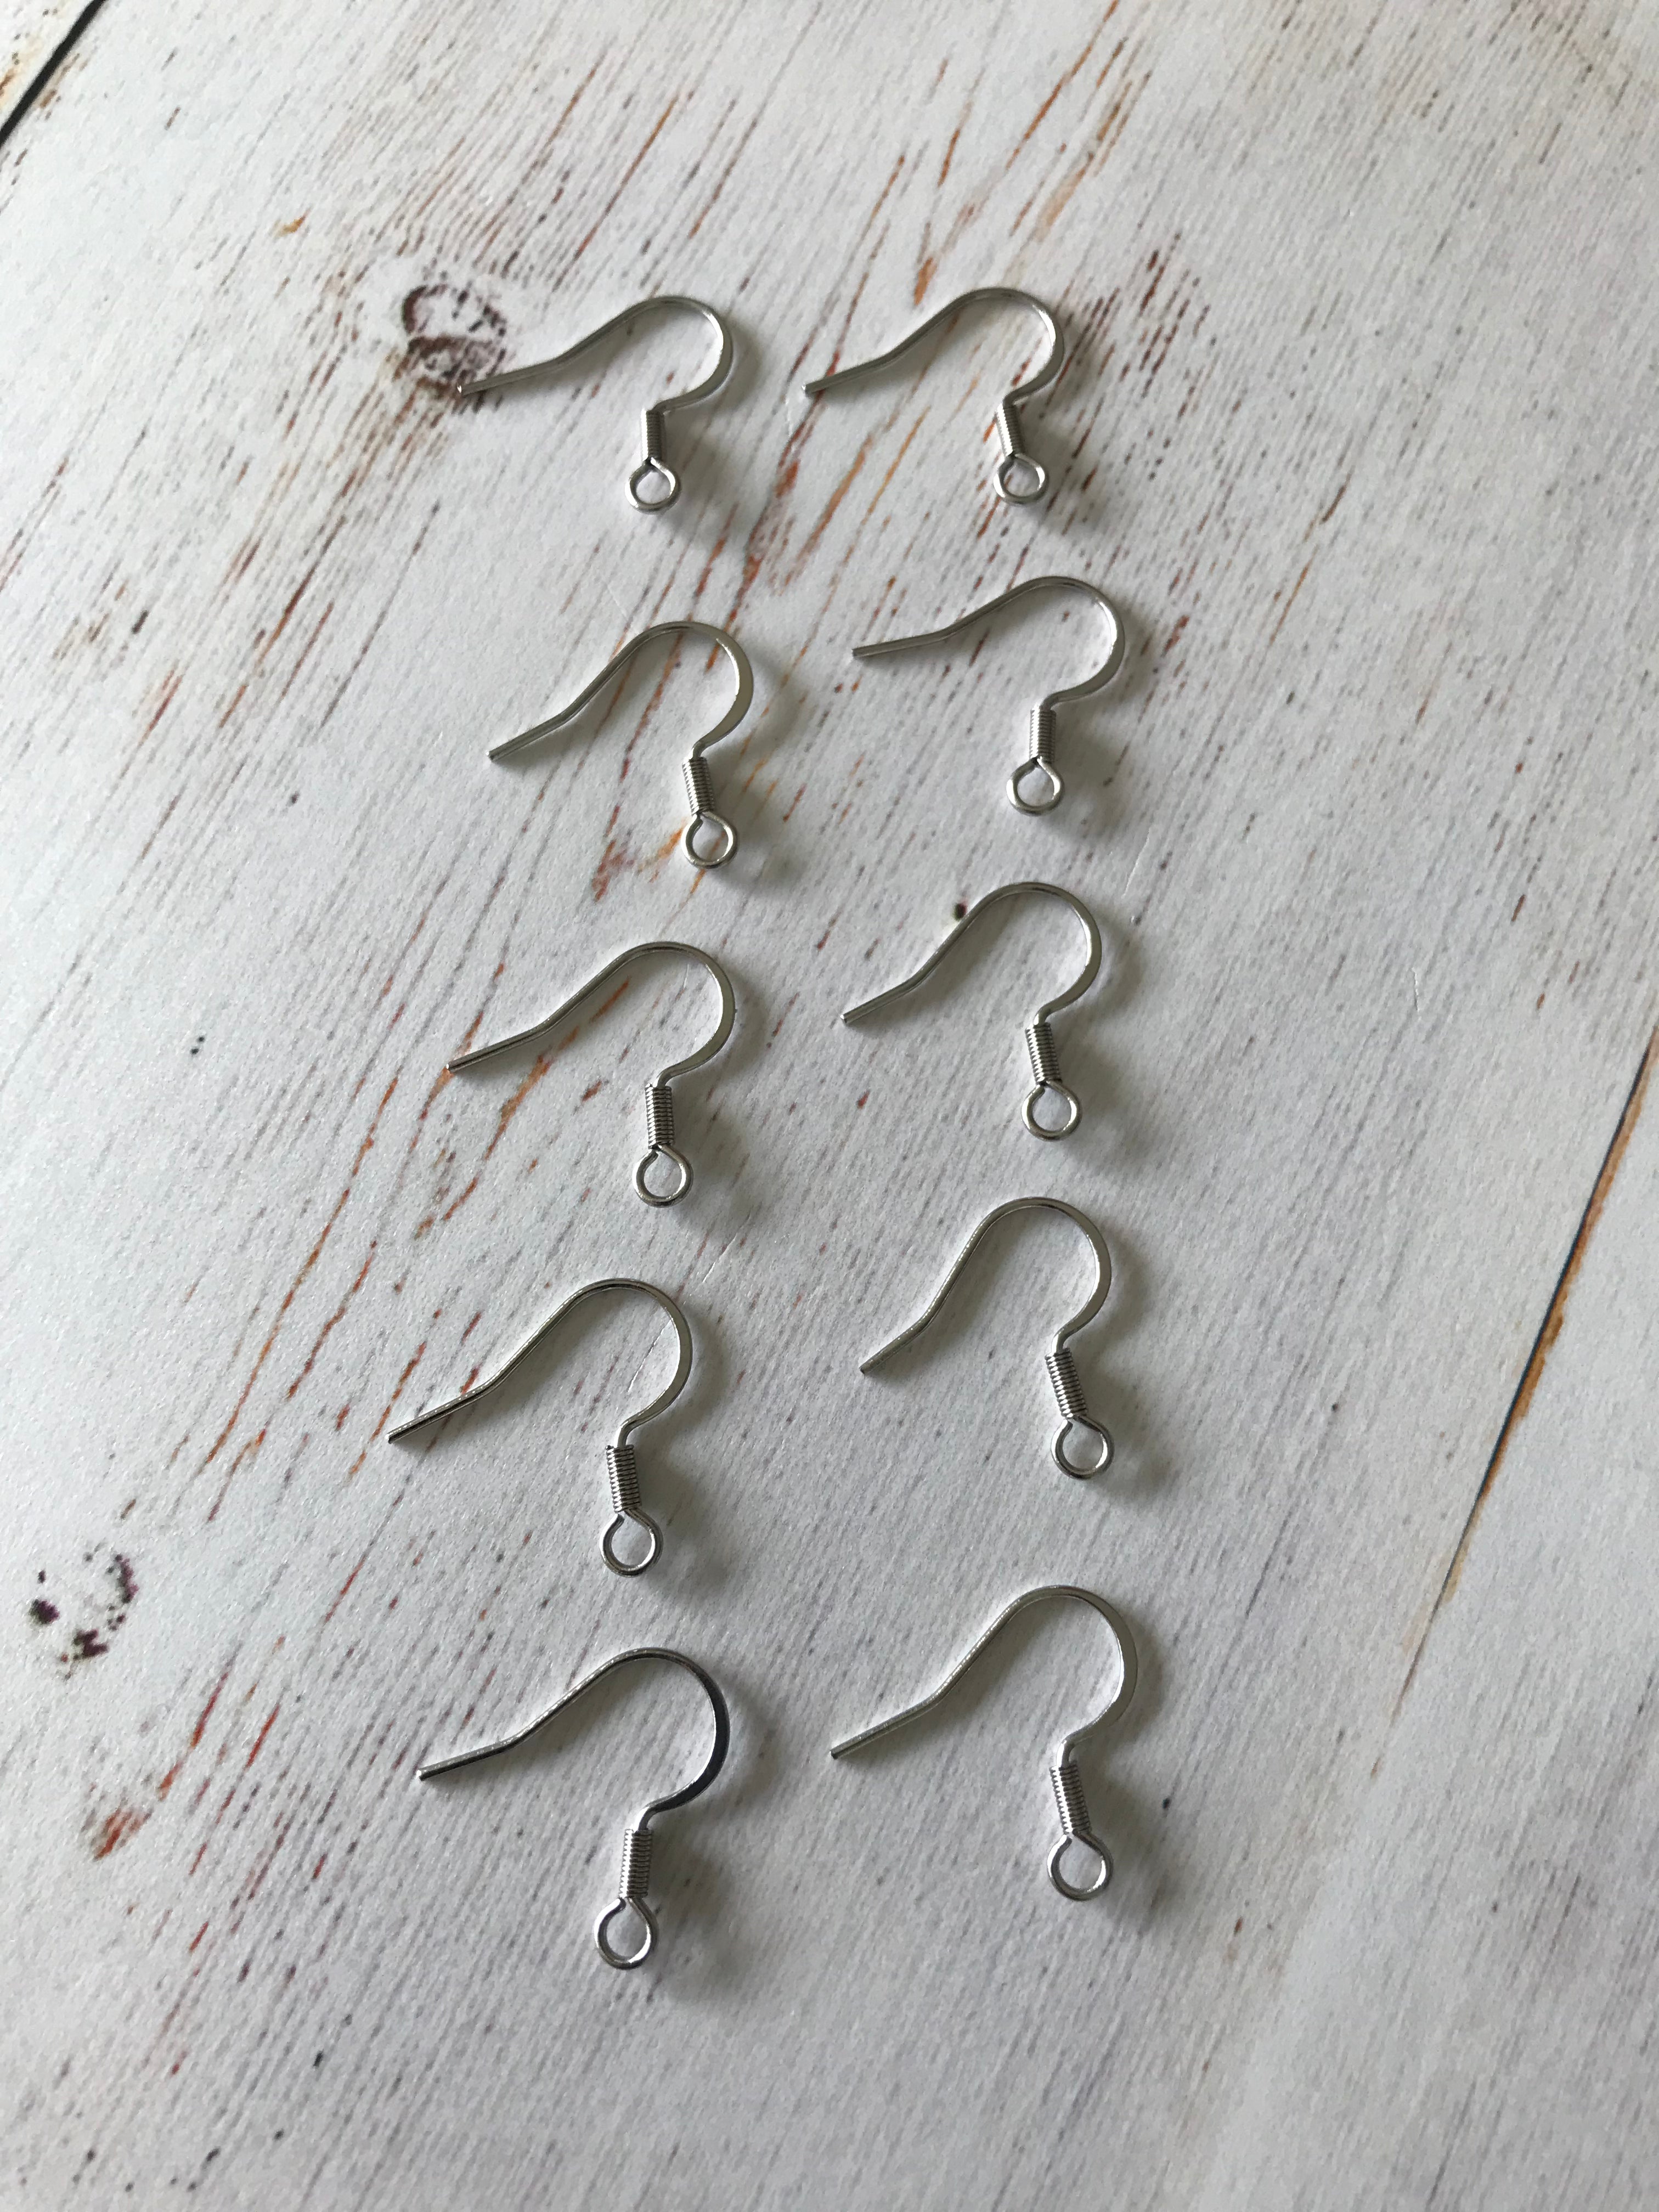 Stainless Steel French Earring Hooks  (5 Pairs)